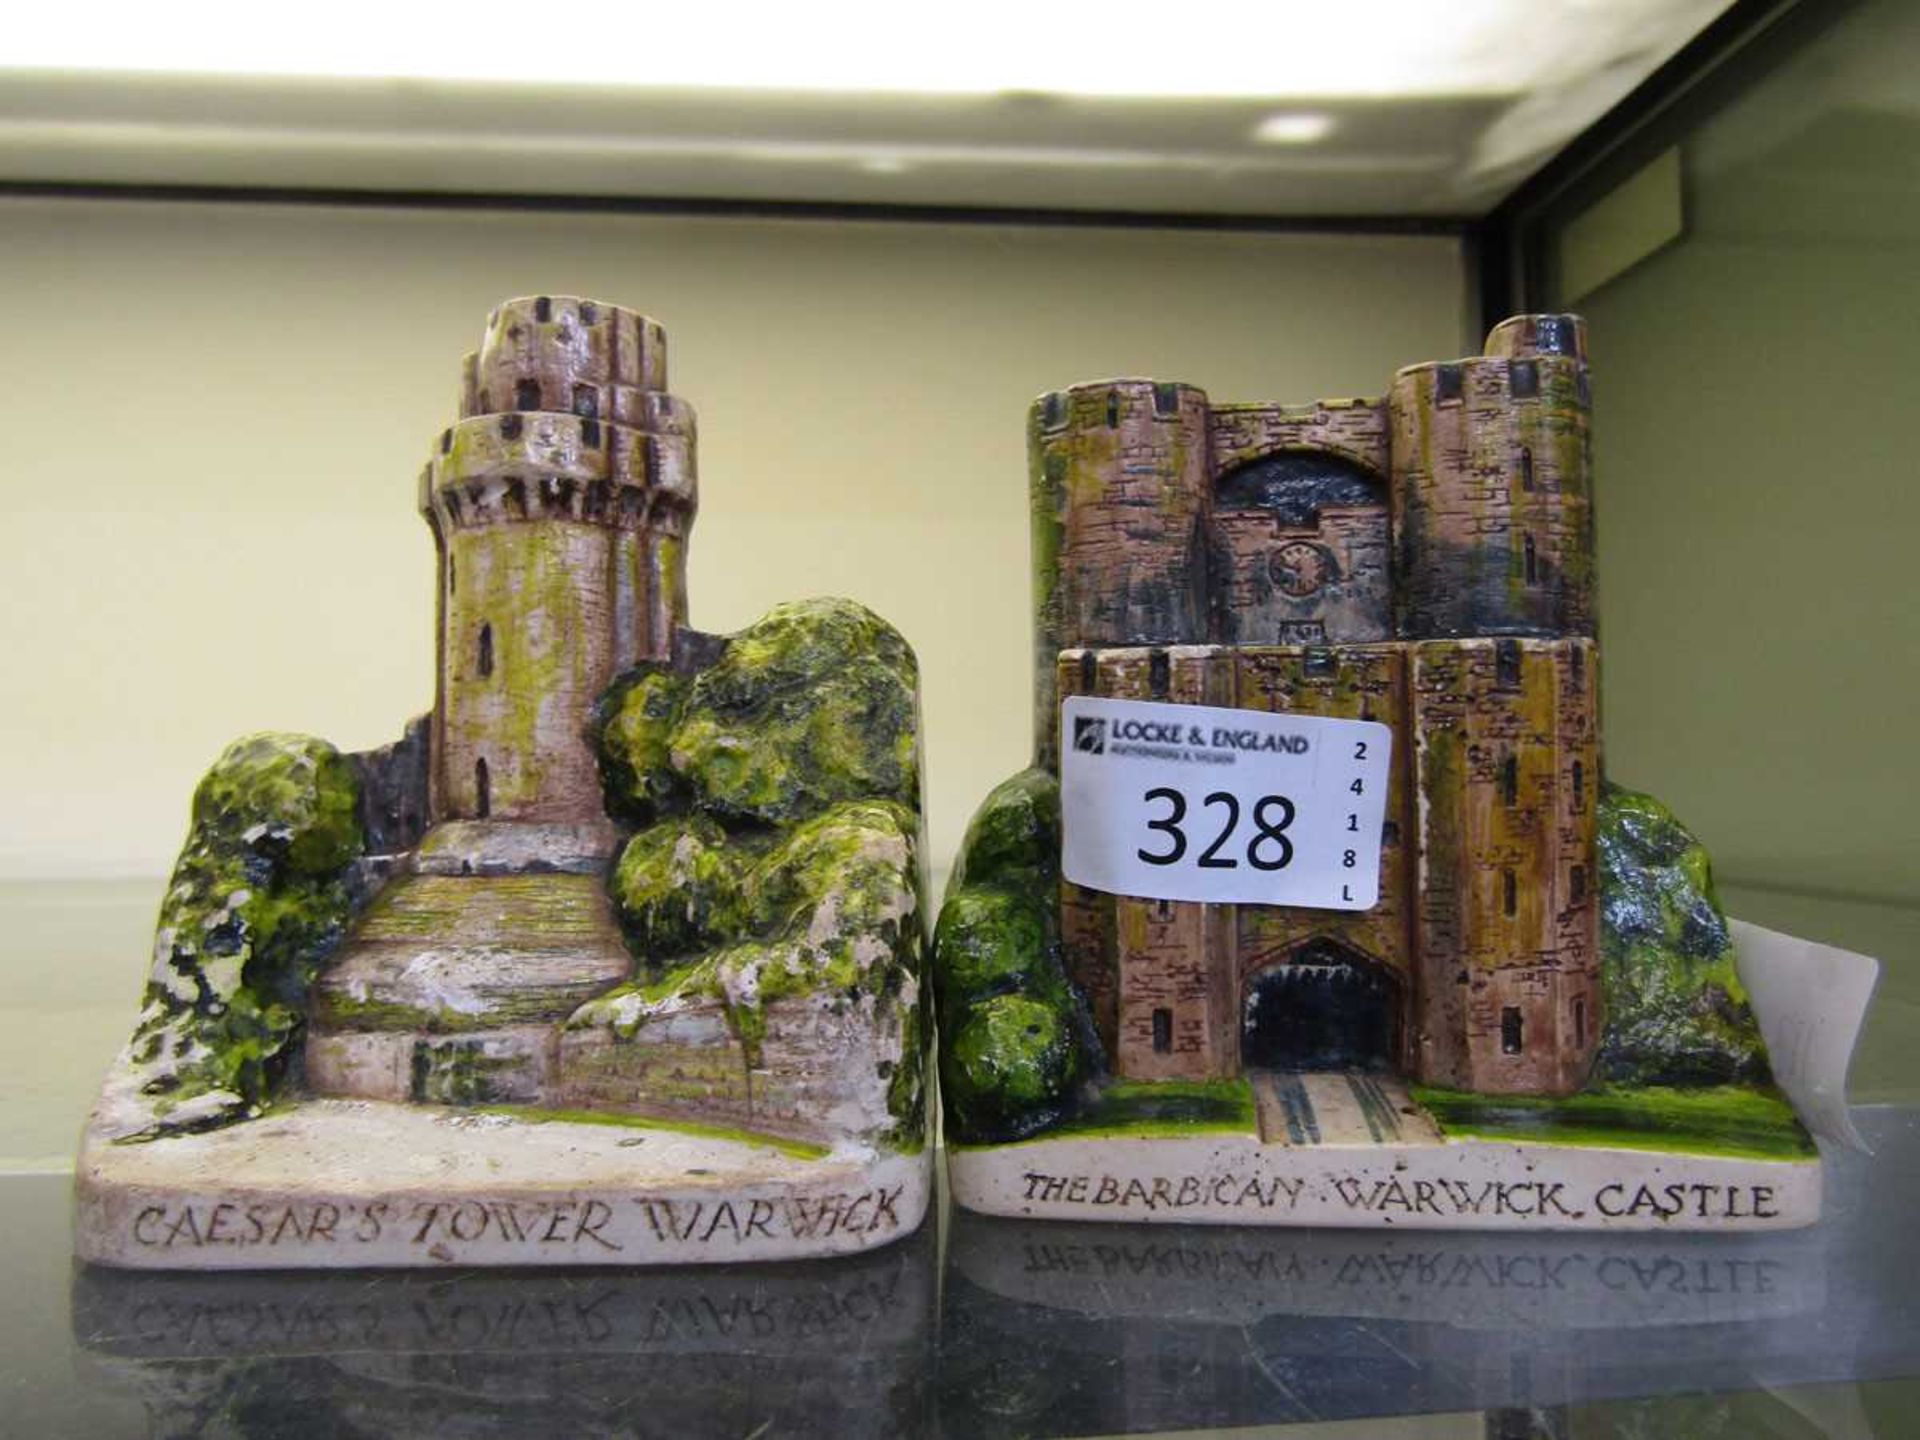 Two plaster moulded models of 'Caesar's Tower' and 'The Barbican' of Warwick, signed A.Coftman